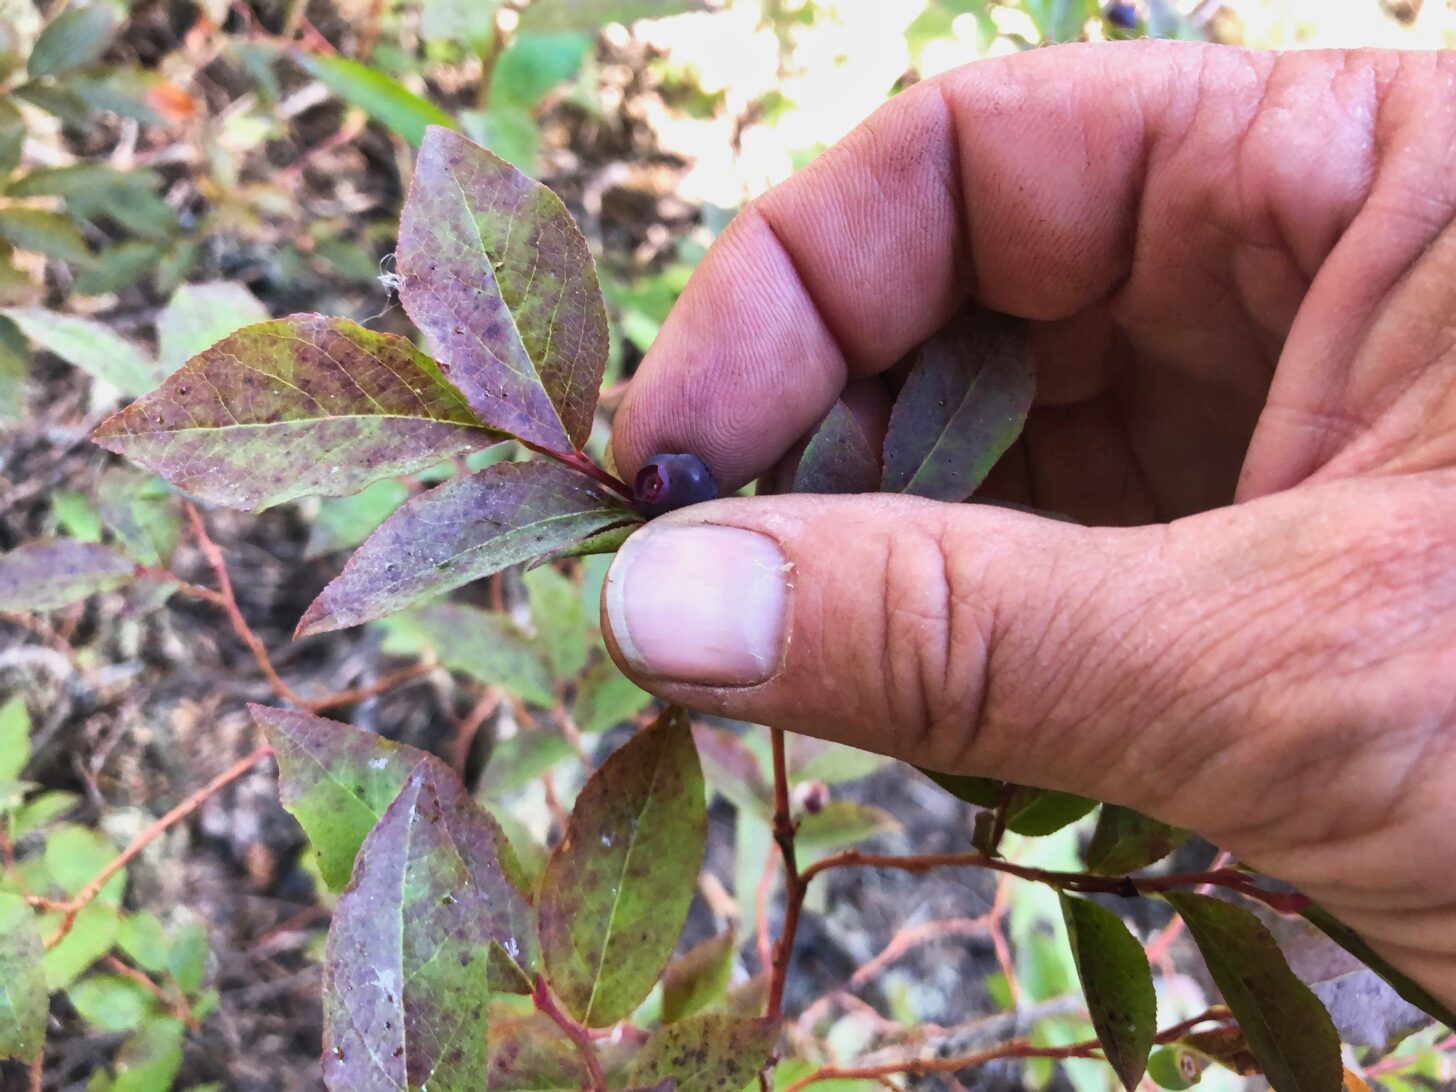 a hand picks a blueberry in a close-up shot.